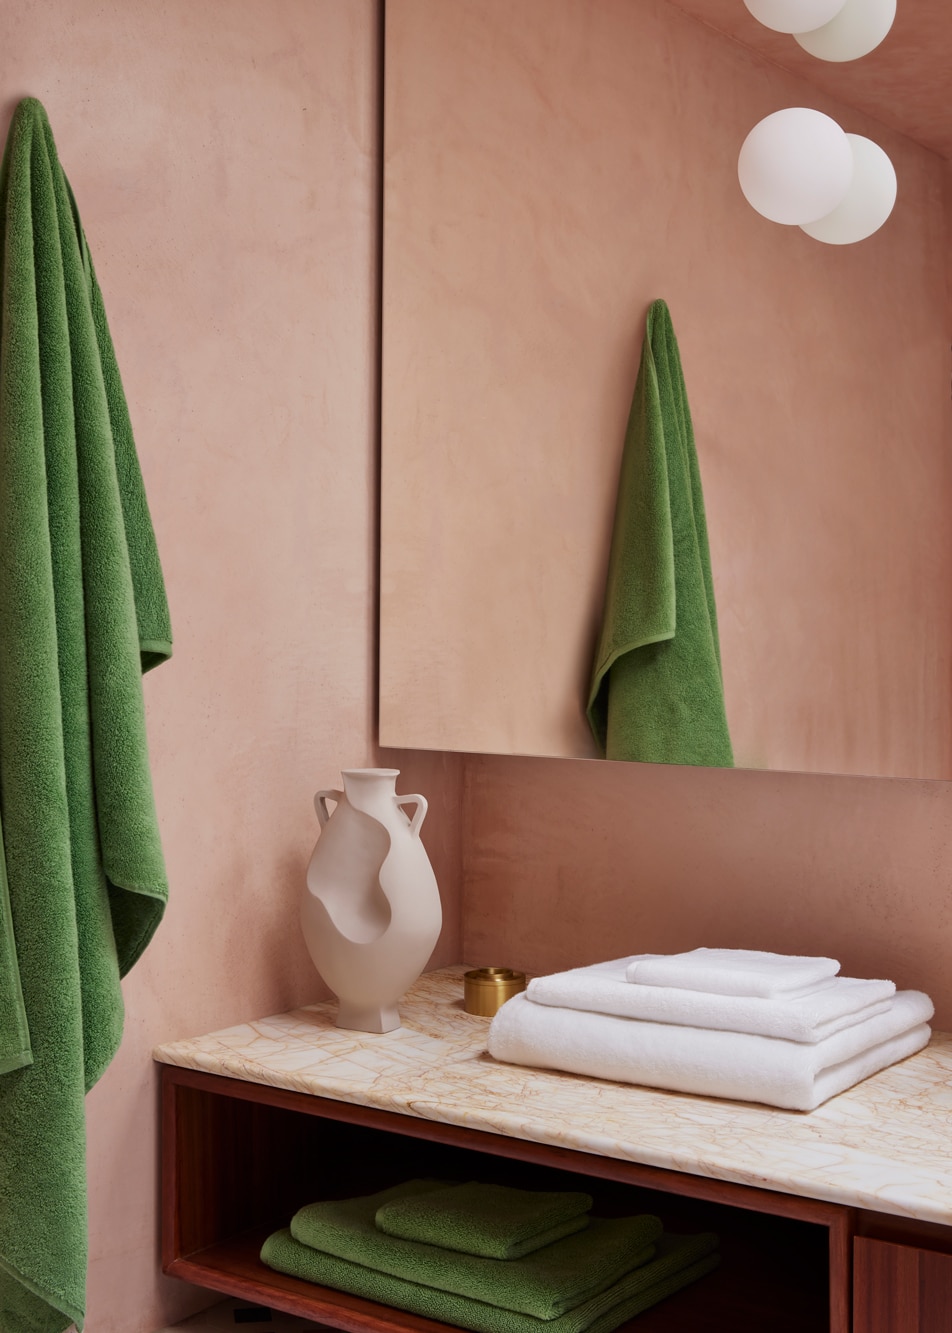 A pink bathroom with a large mirror and marble countertop. A green towel hangs on the wall and a pile of white towels sit on the counter.